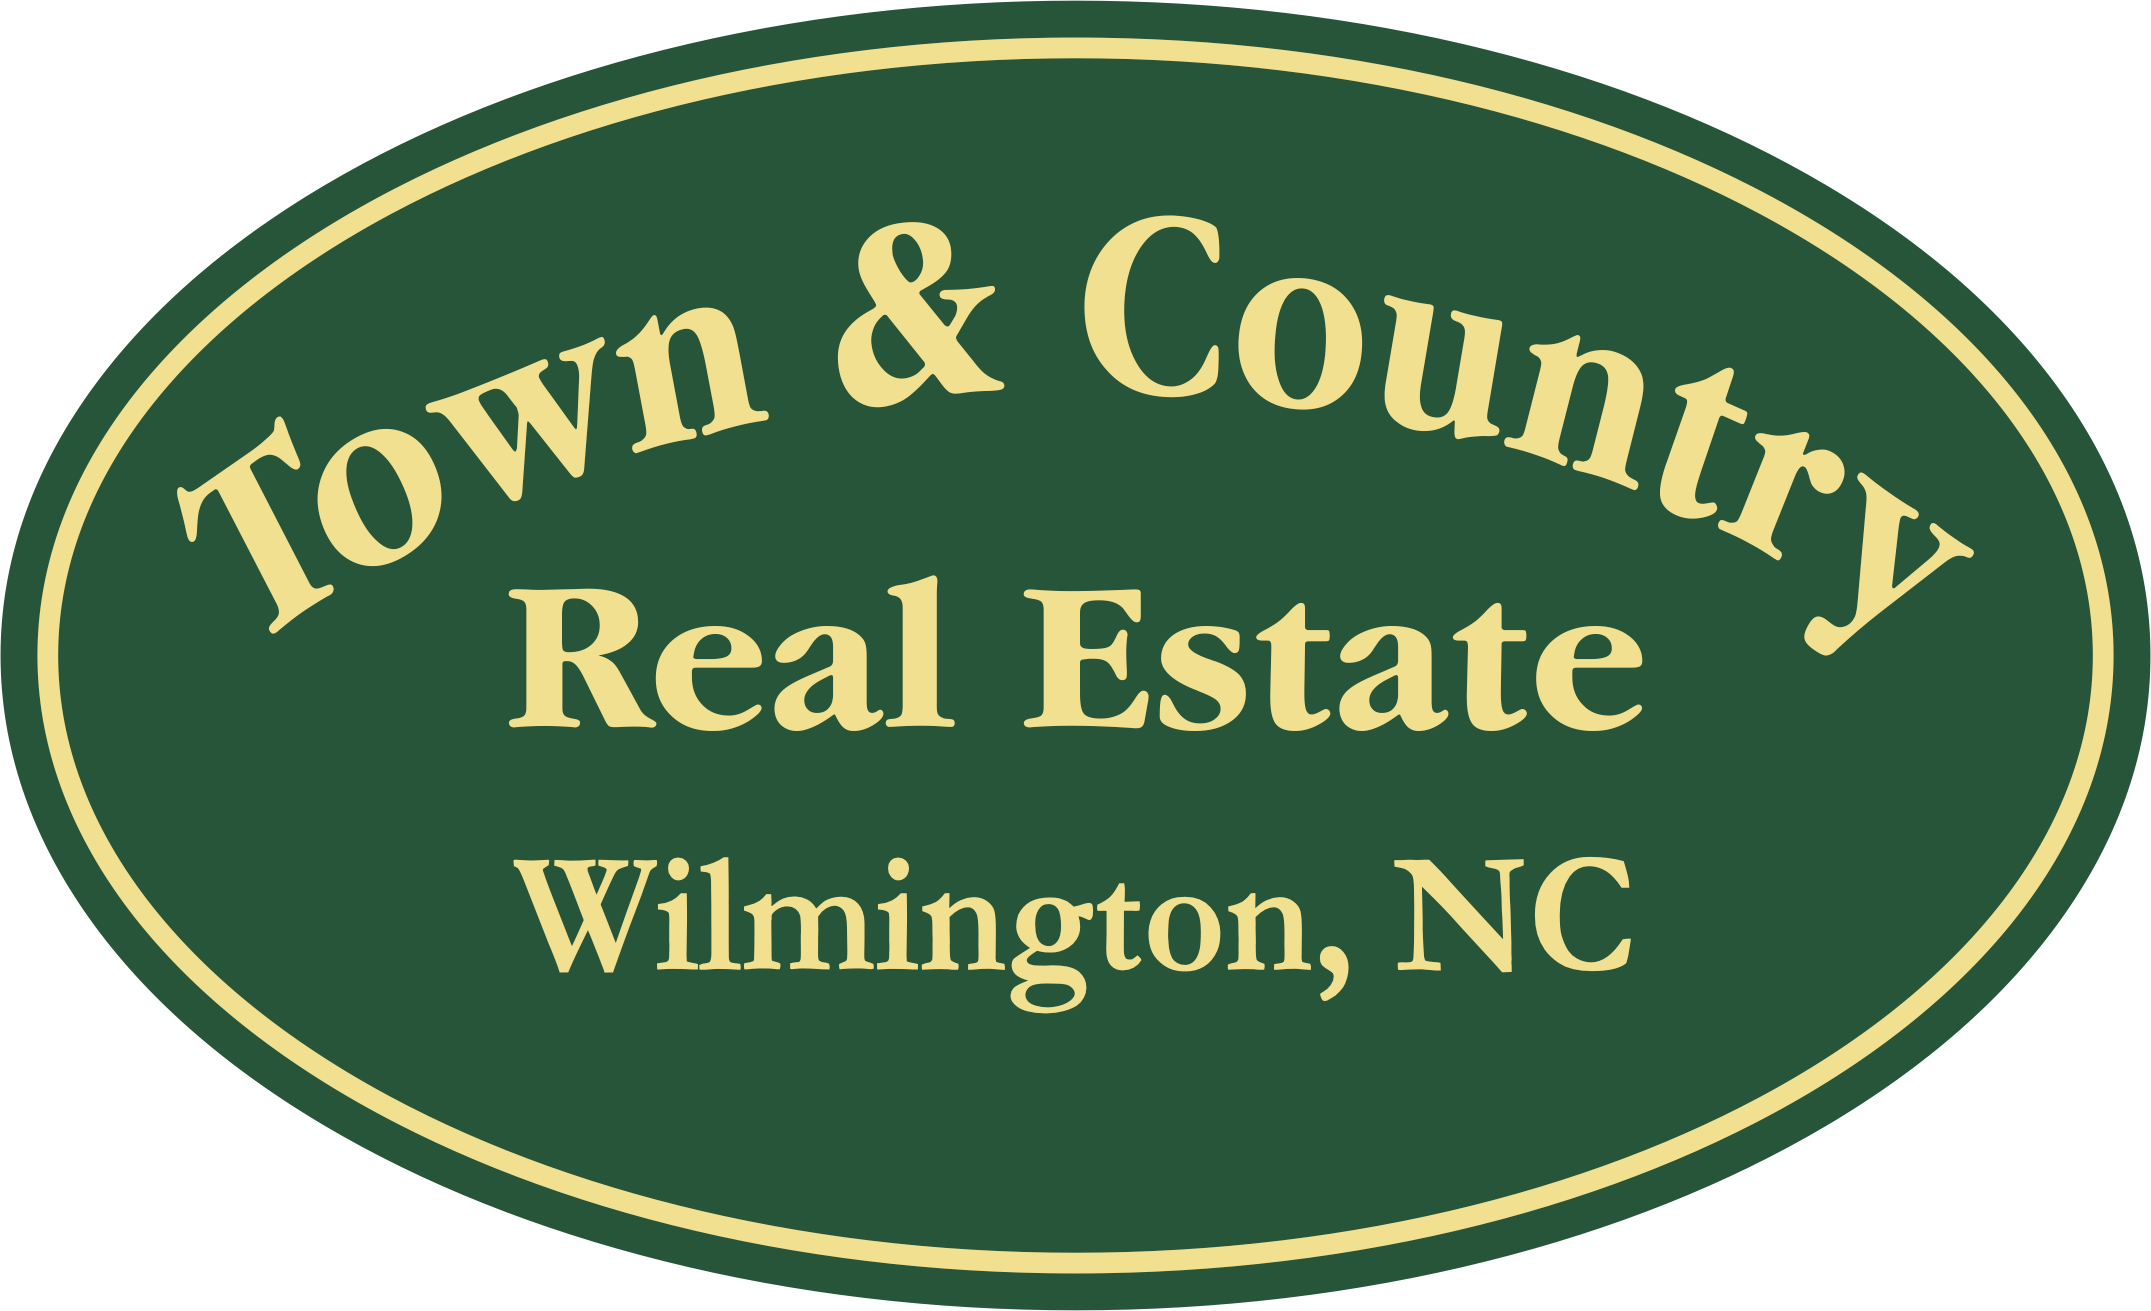 Town & Country Real Estate